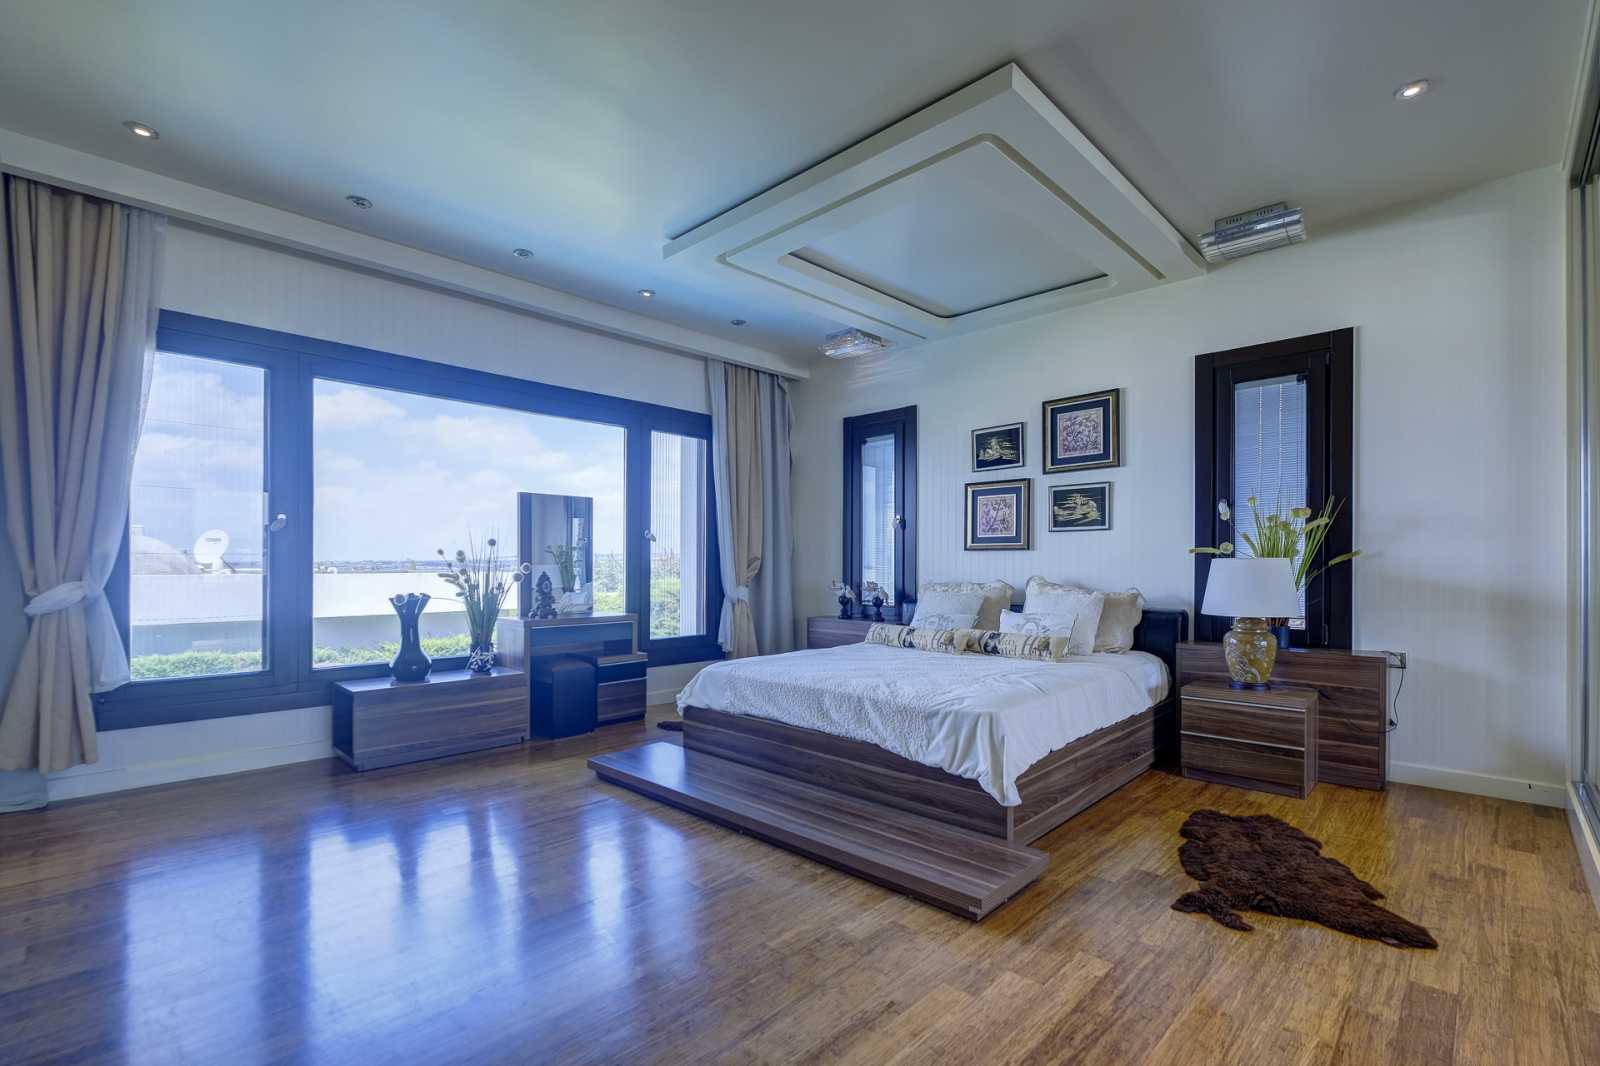 Deluxe Istanbul Spa Property For Sale 21